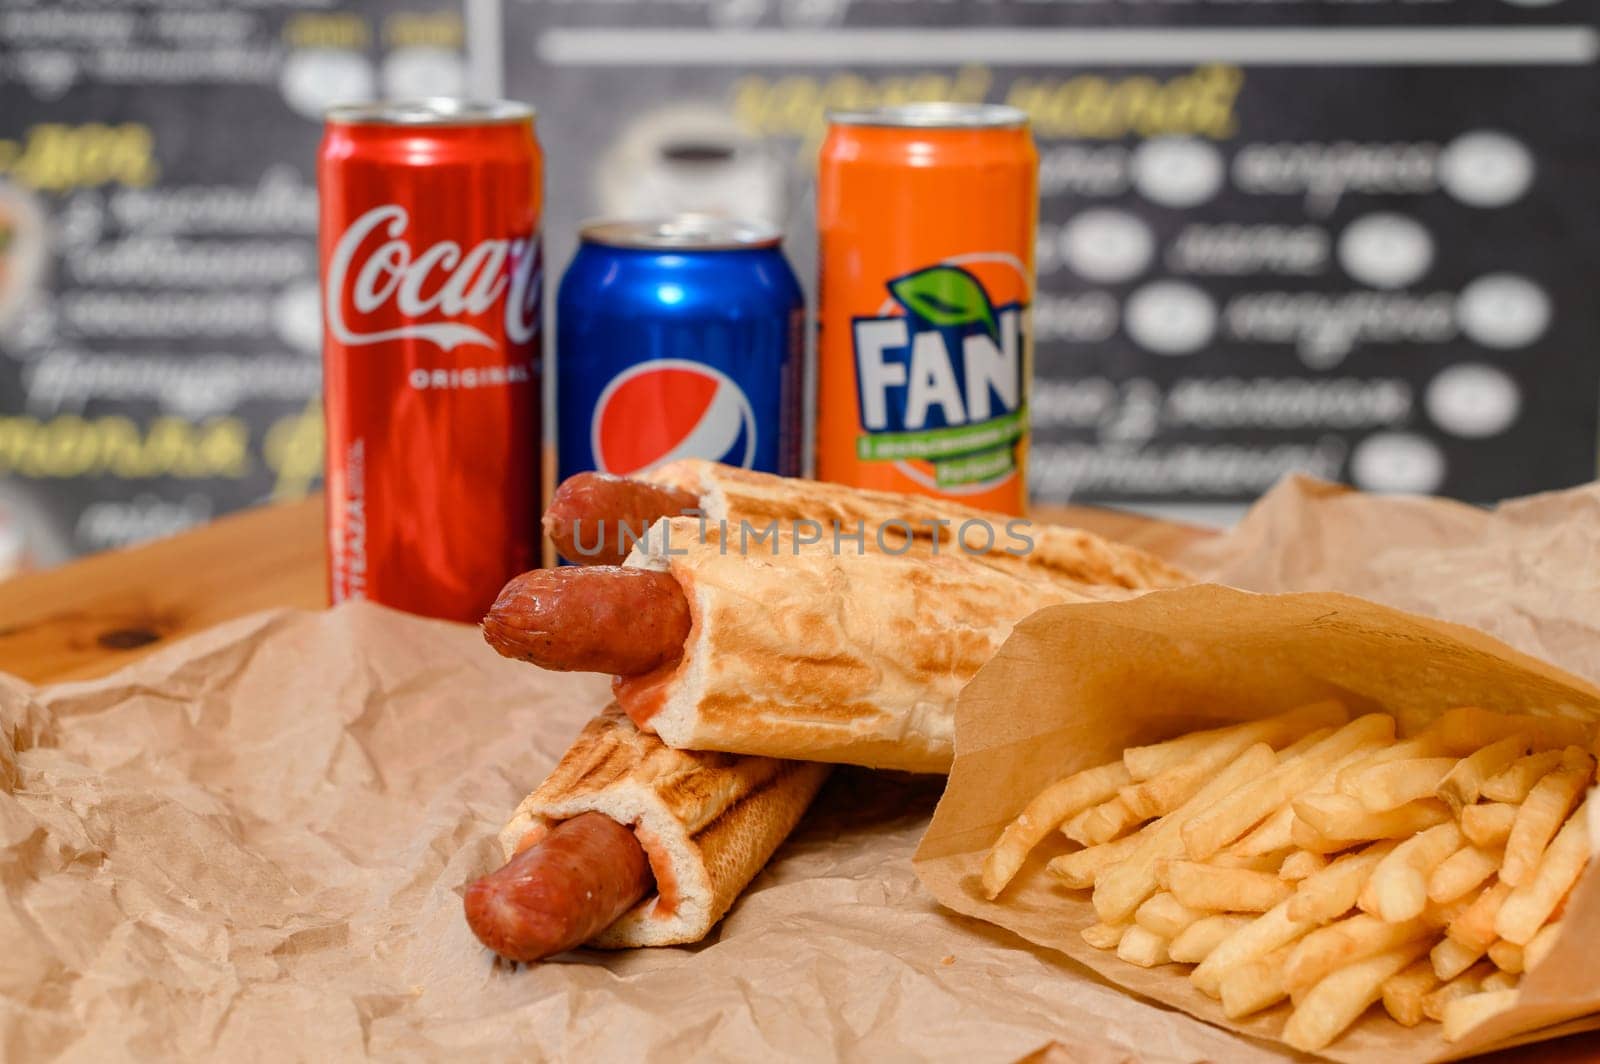 Ivano-Frankivsk, Ukraine March 26, 2023: three bottles of coke, fanta and pepsi with hotdogs and french fries on the table, fatty and unhealthy food.